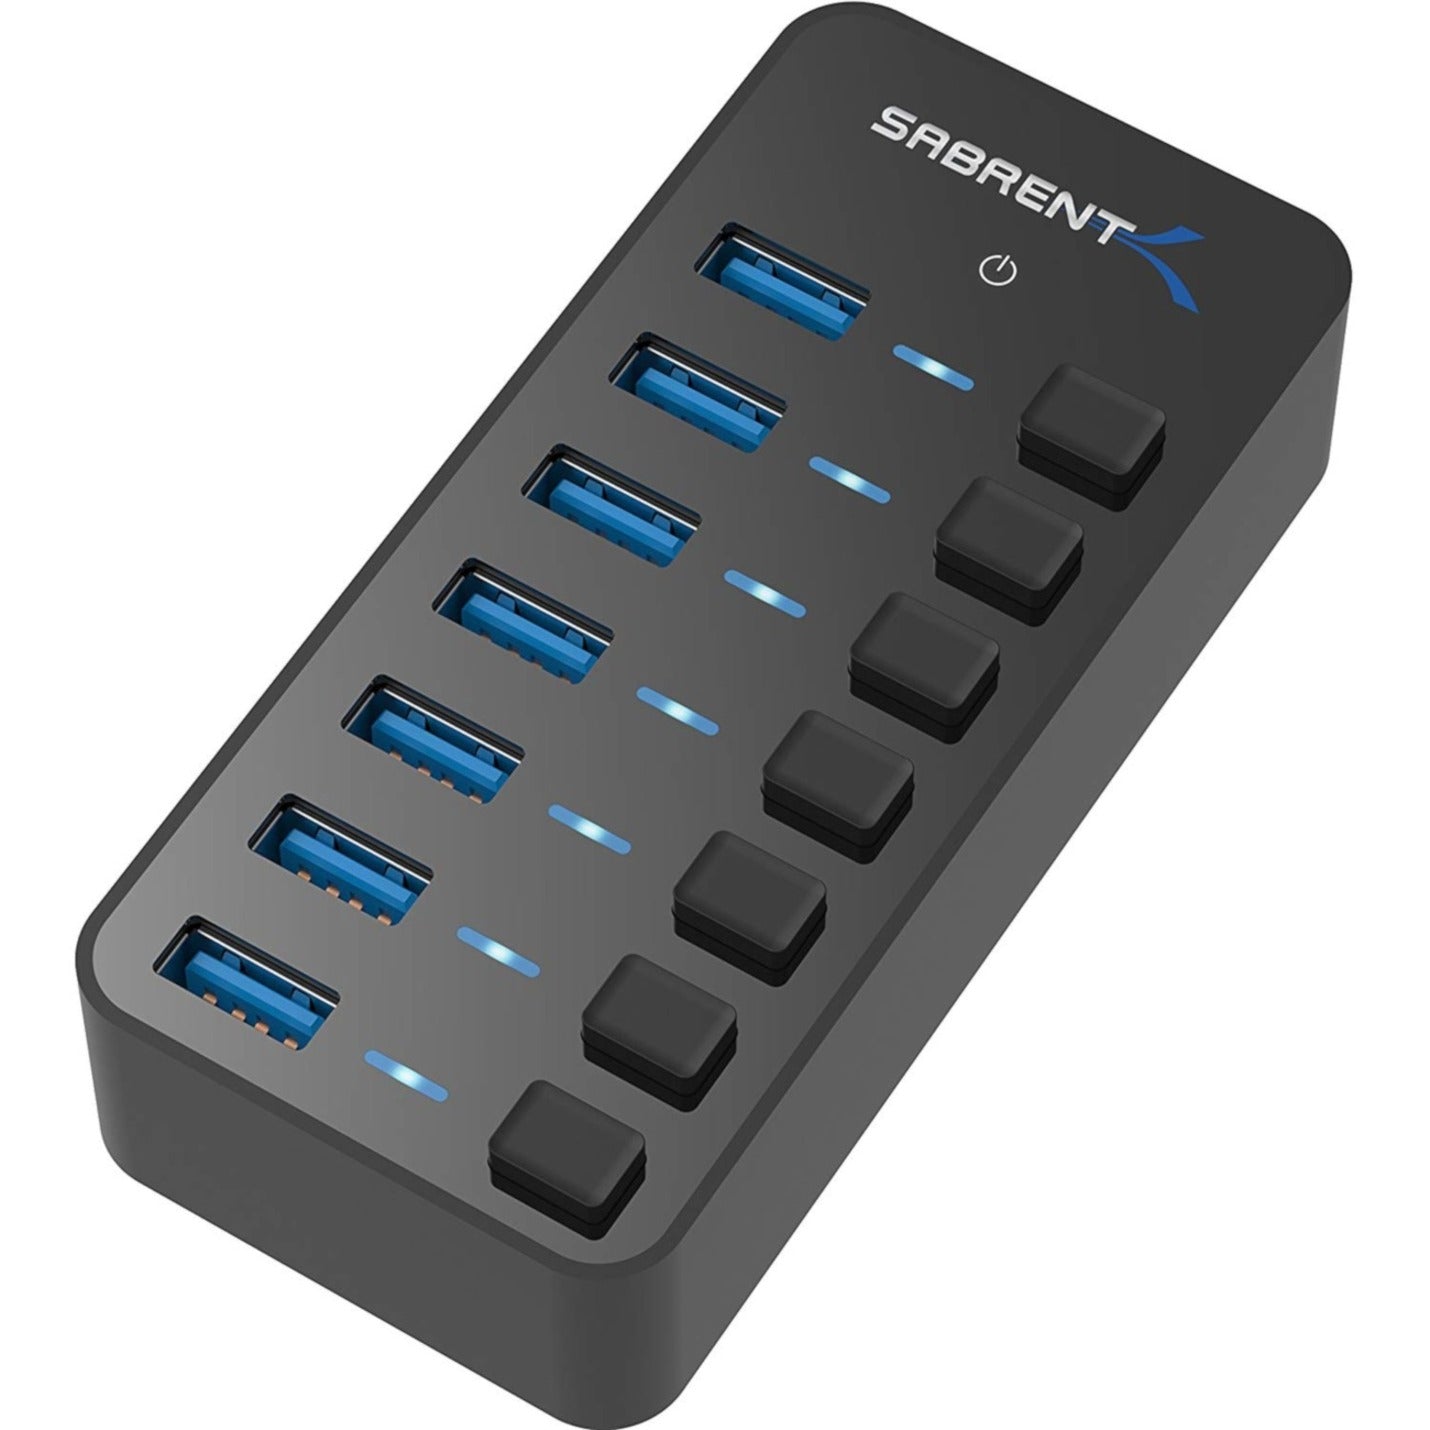 Sabrent HB-BUP7 36W 7-Port USB 3.0 Hub with Individual Power Switches and LEDs, Expand Your USB Connectivity